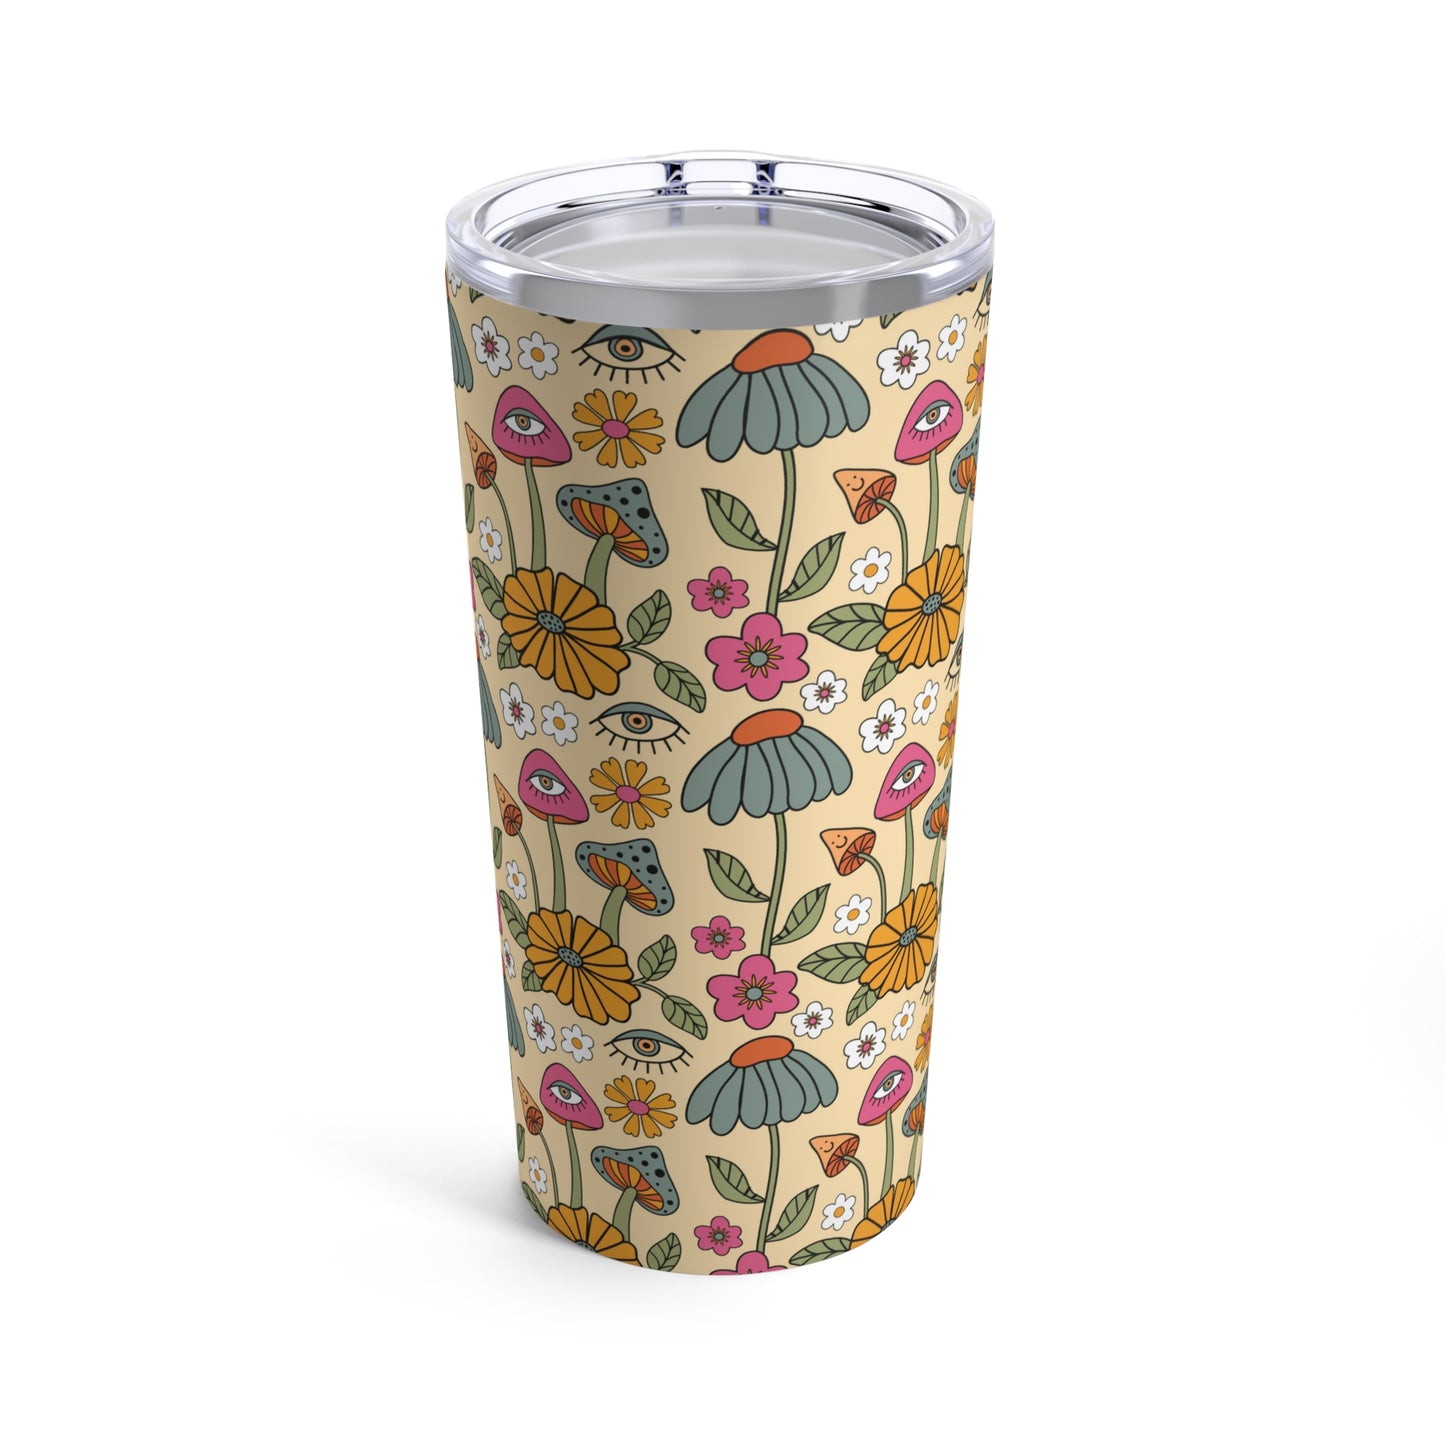 Groovy stainless Tumbler 20oz for her. Vacuum insulated with groovy mushroom and flowers. Christmas gift for family or friends